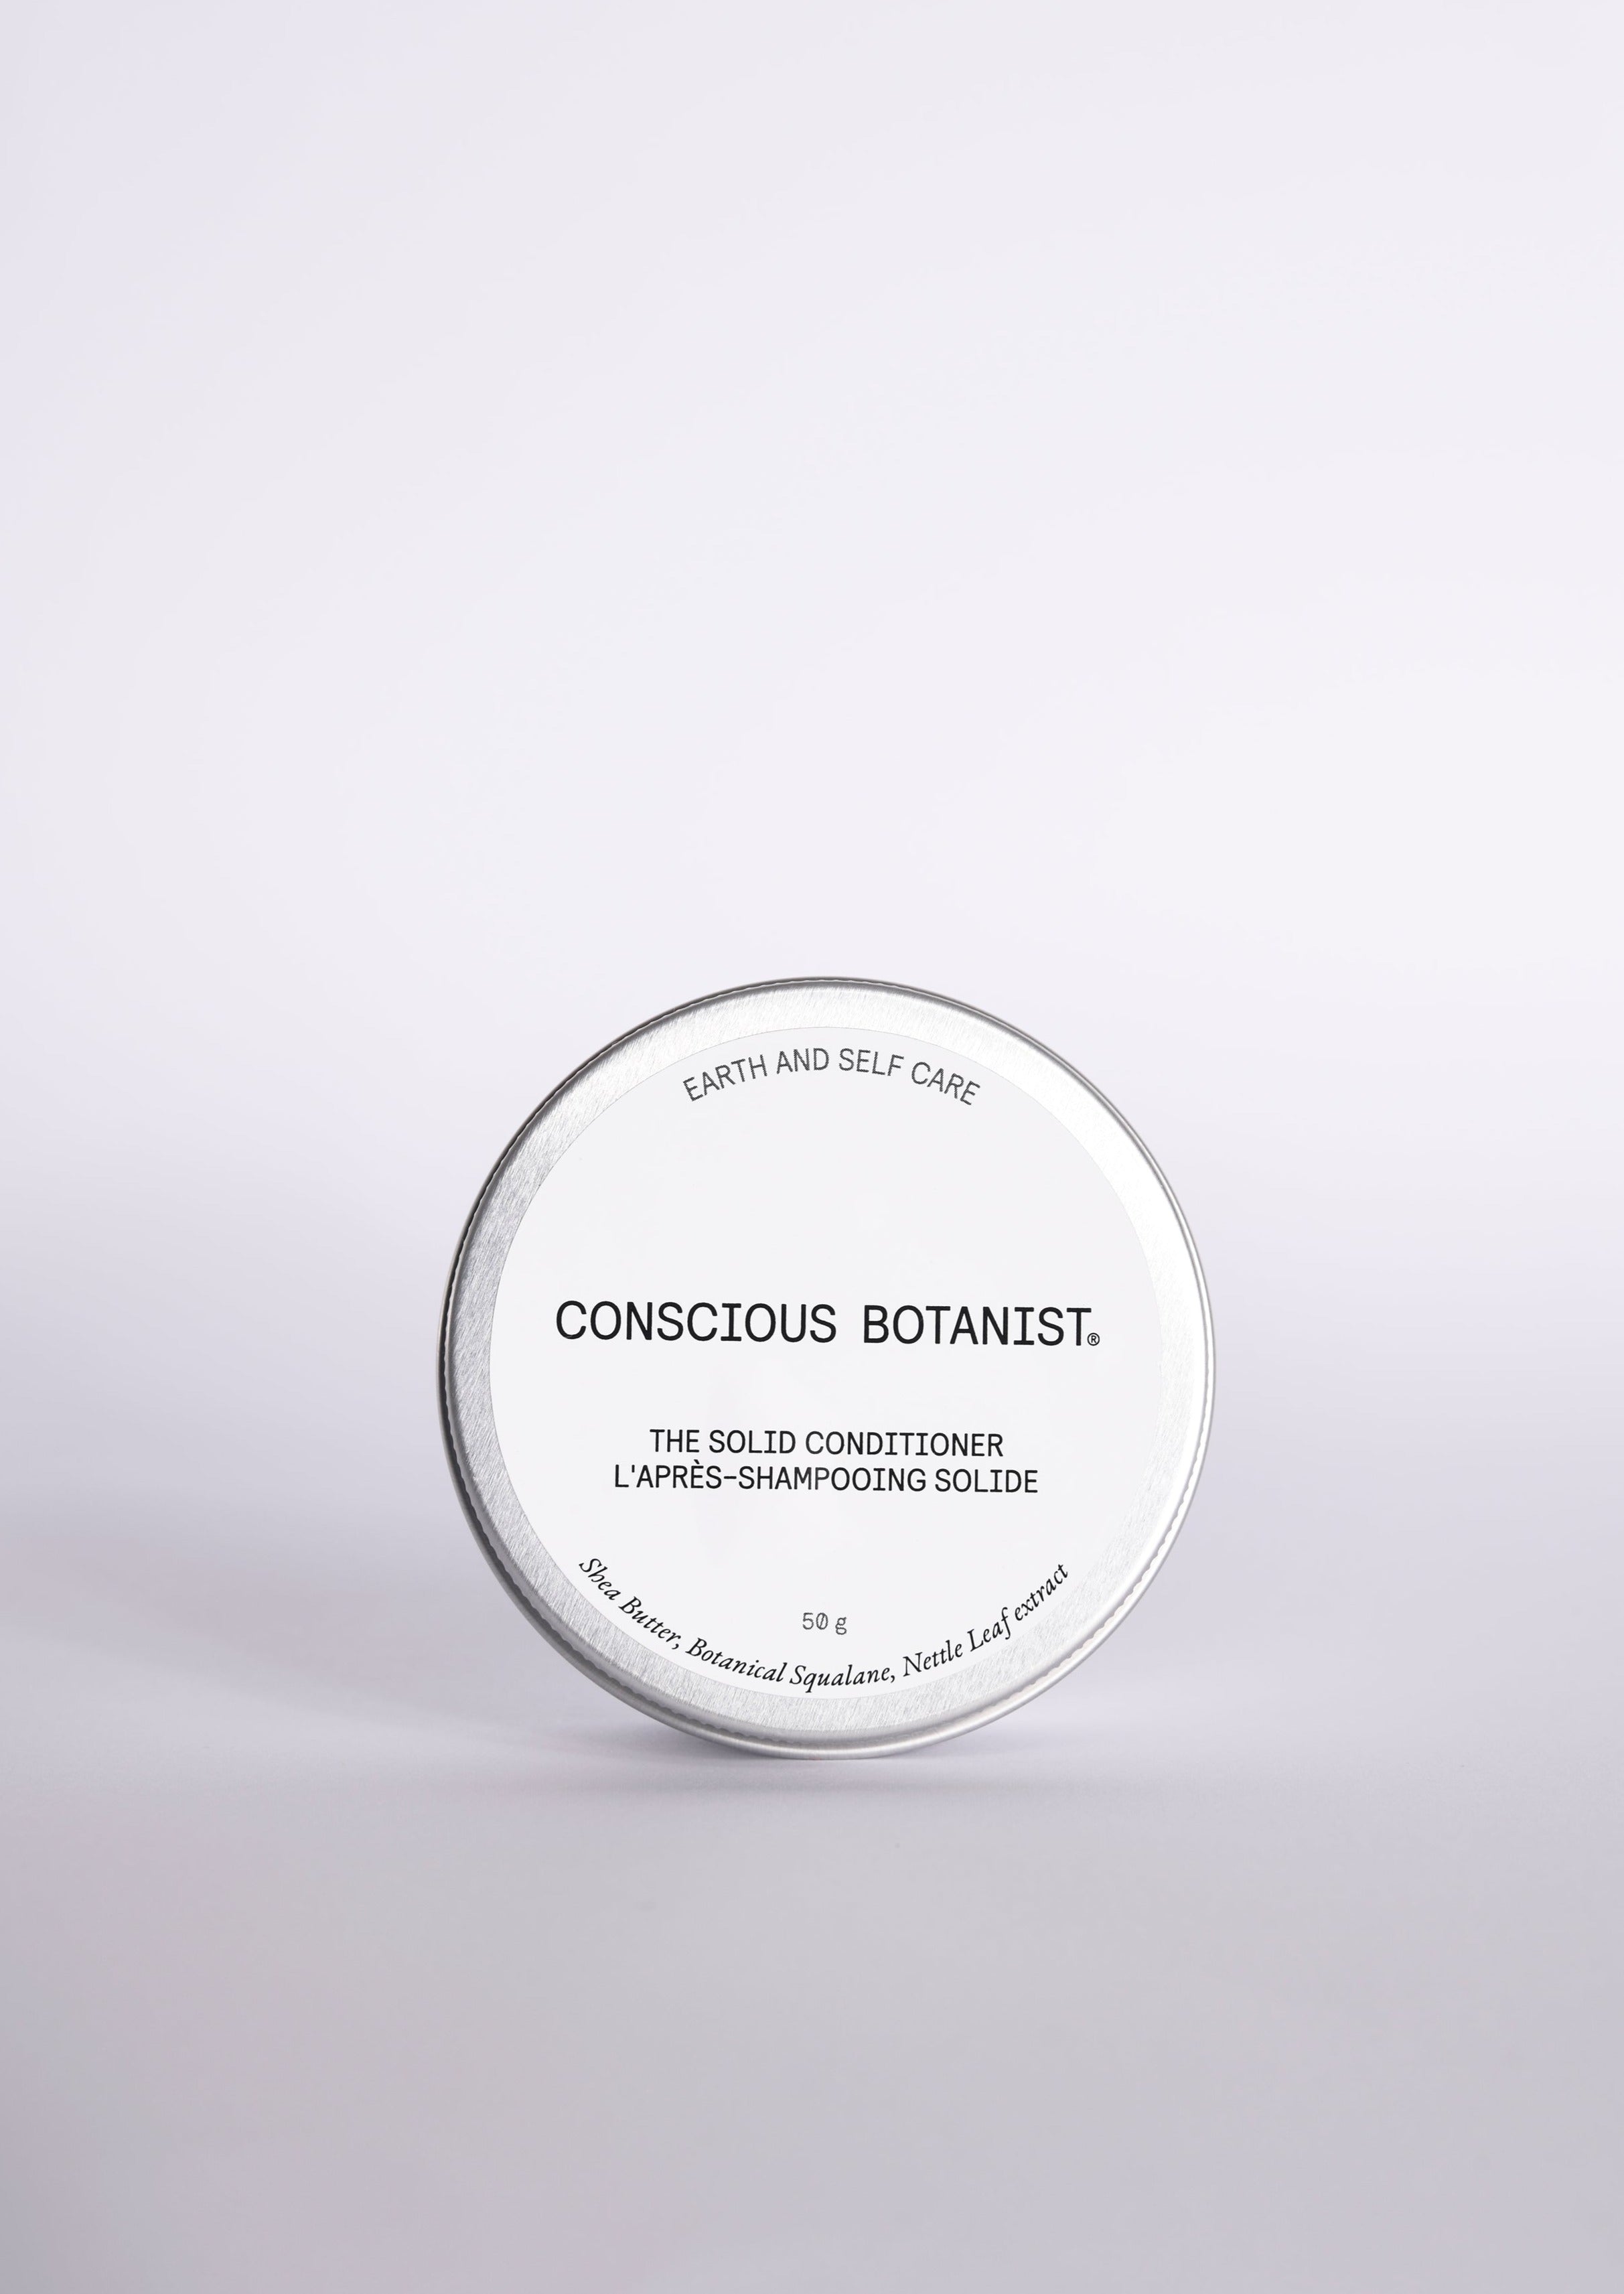 The Solid Conditioner